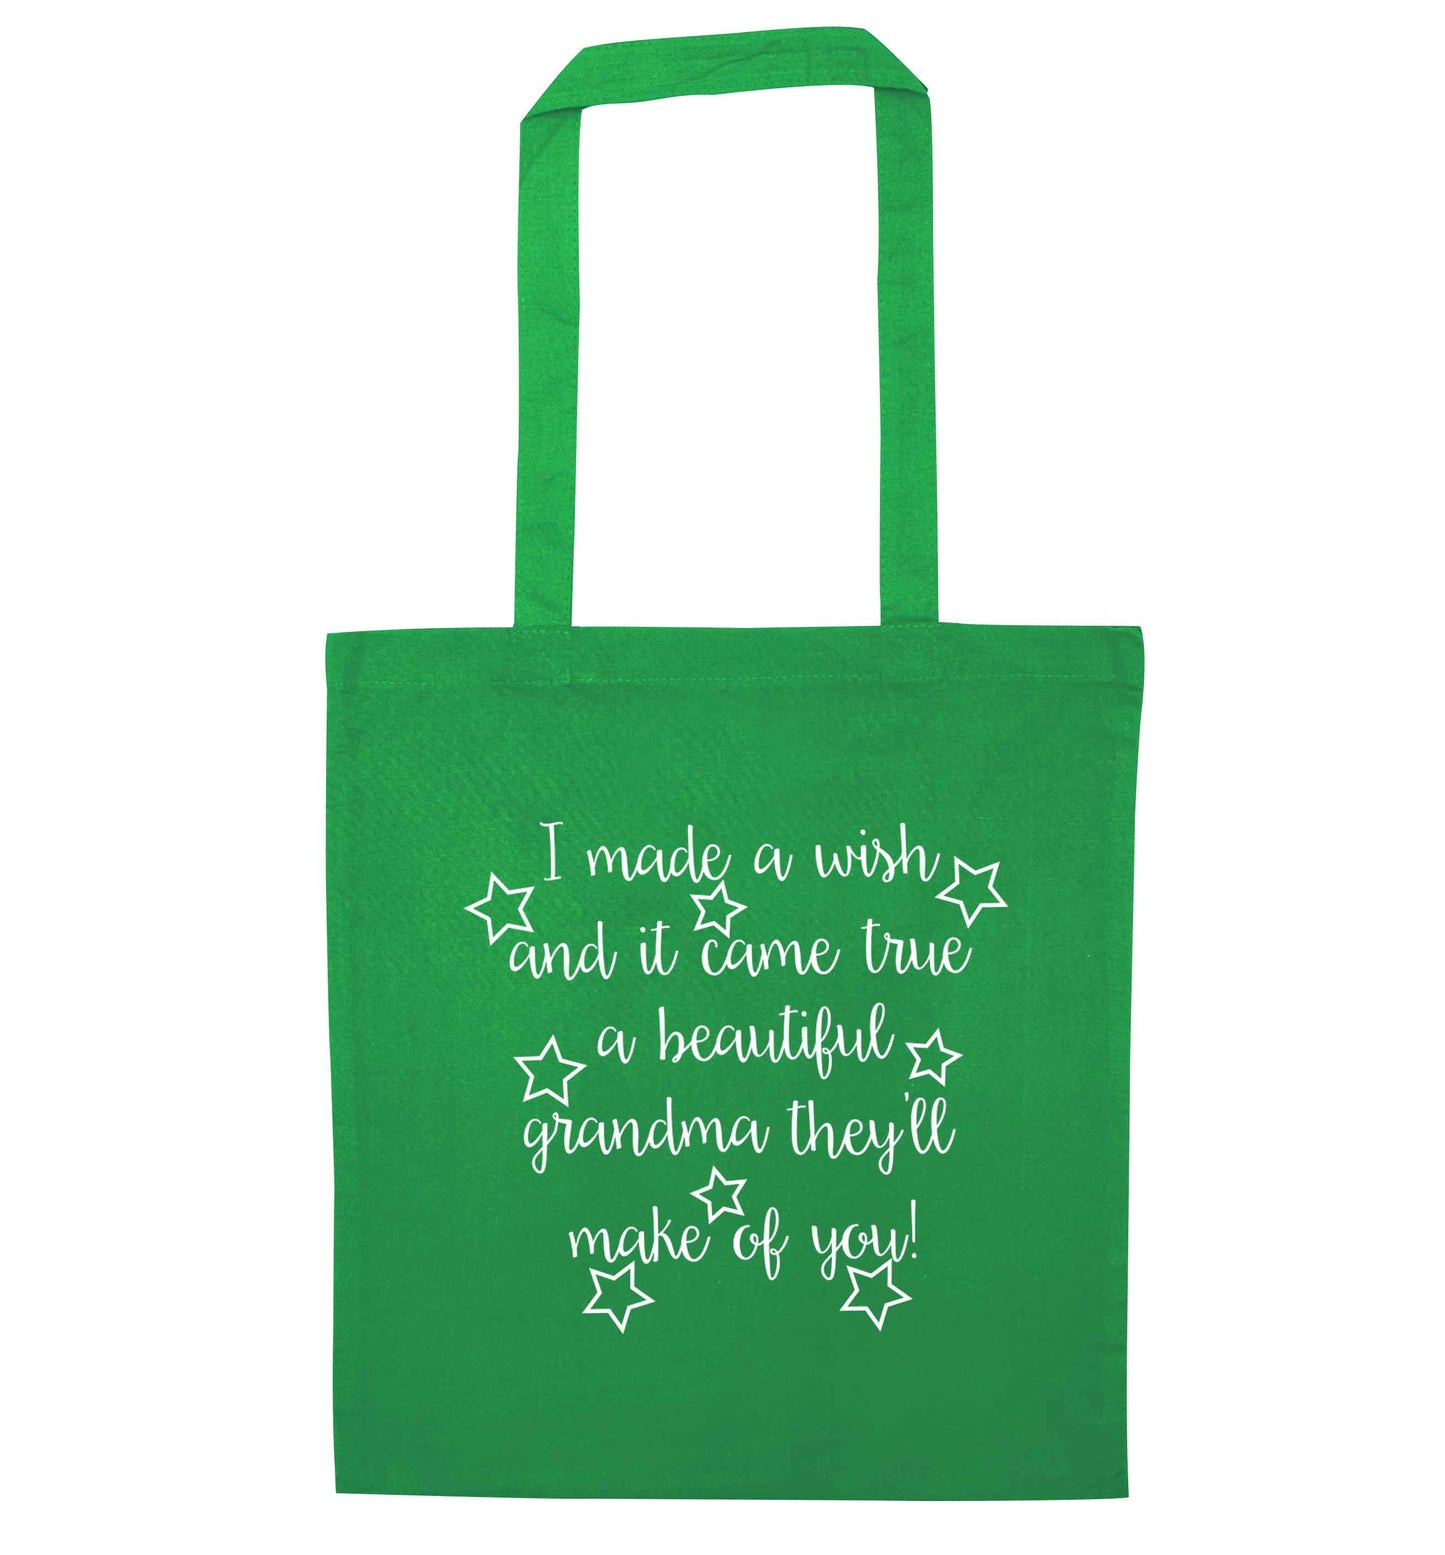 I made a wish and it came true a beautiful grandma they'll make of you! green tote bag